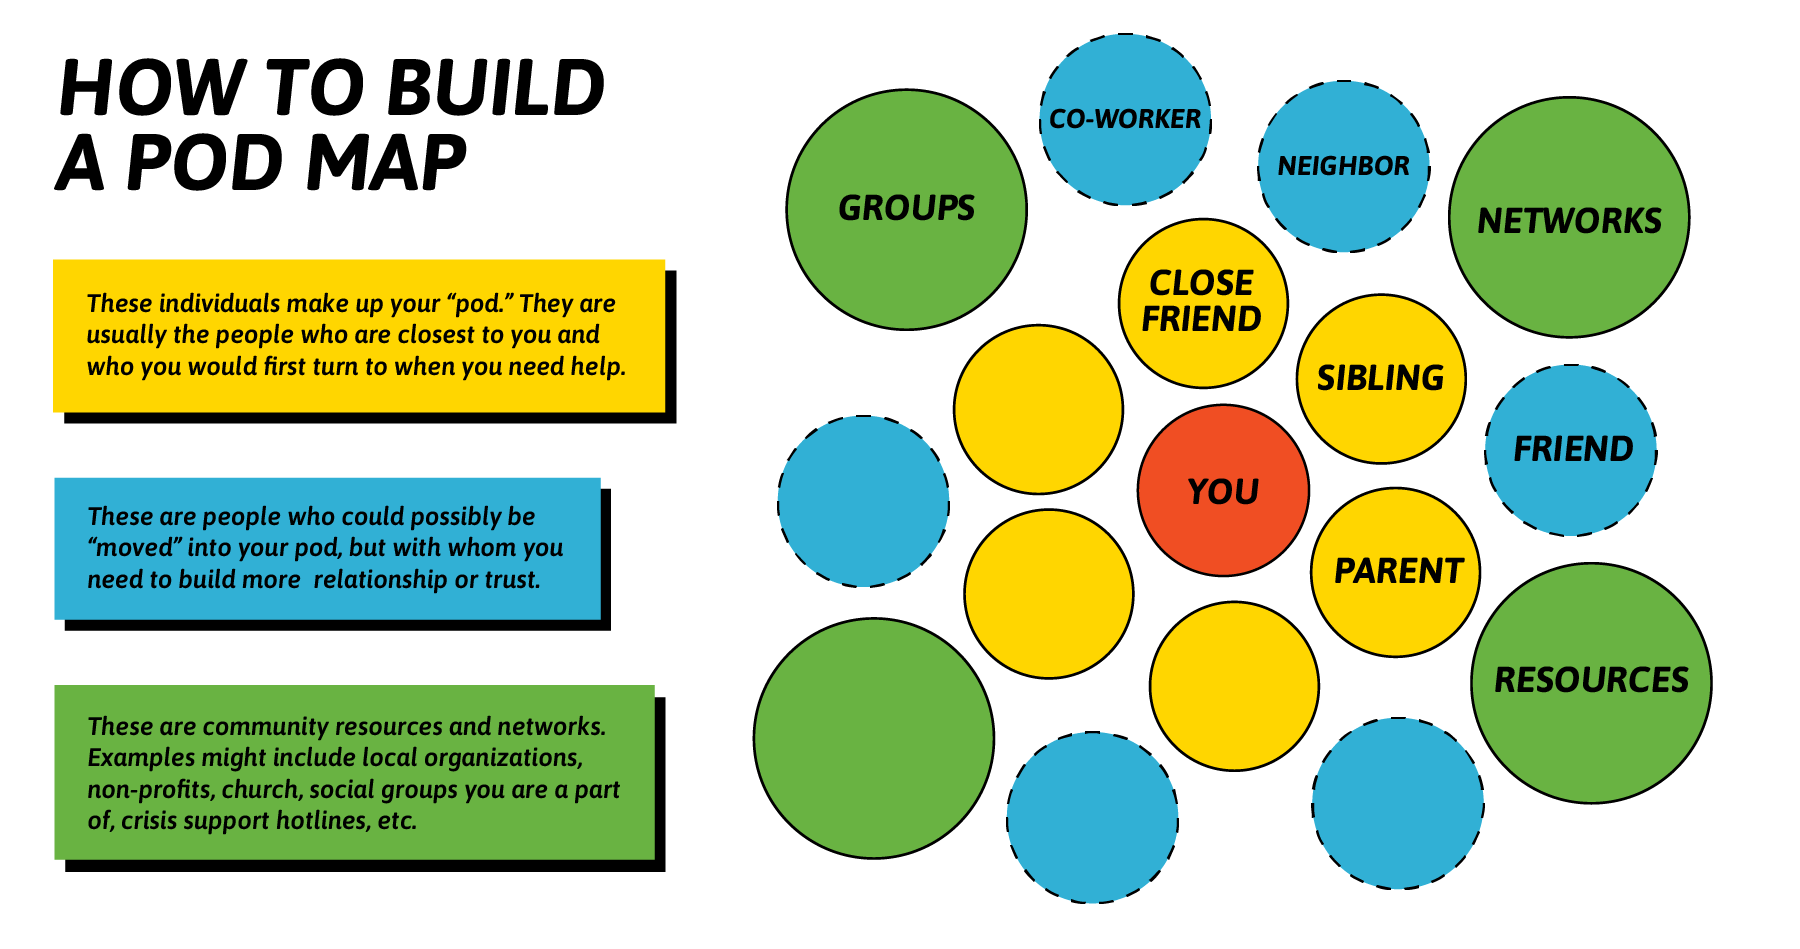 A pod map graphic showing various circles clustered around a center circle labeled 'You'. Encircling the center circle are 3 circles labeled 'Close Friend', 'Siblings', and 'Parent'. Farther out there are circles labeled 'Co-worker', 'Neighbor', 'Friend', 'Groups', 'Networks', and 'Resources'